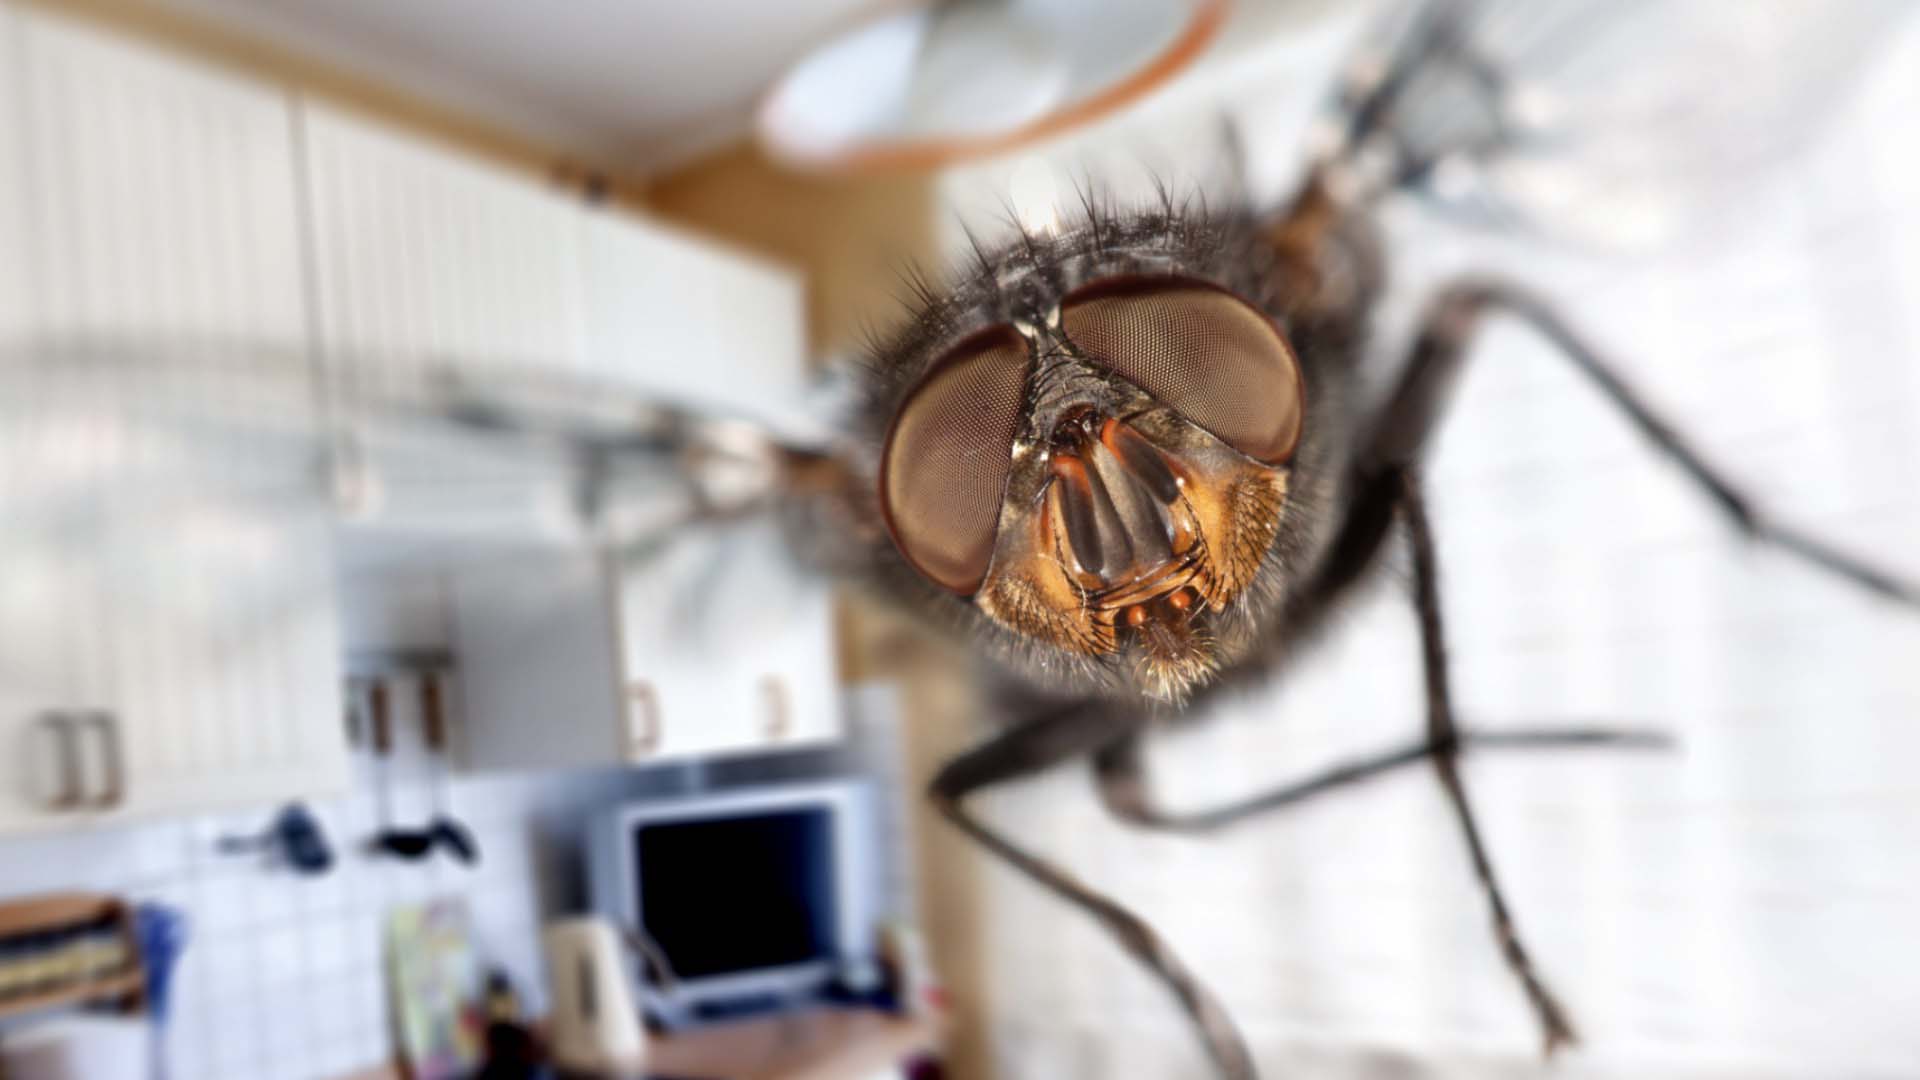 Close up of a fly in a home